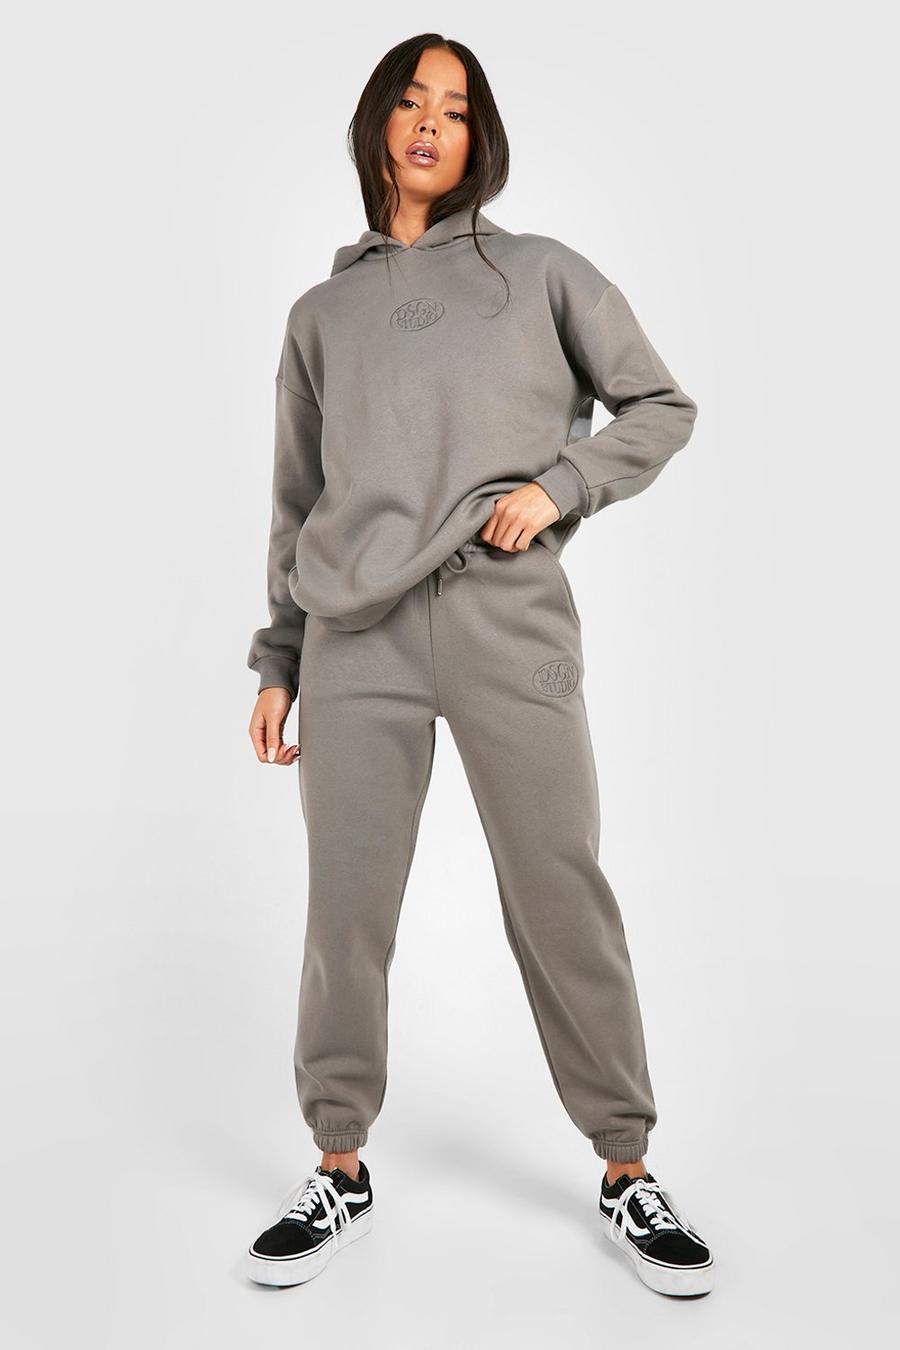 Charcoal Petite Embroidery Dsgn Hoody & Track Pants Tracksuit